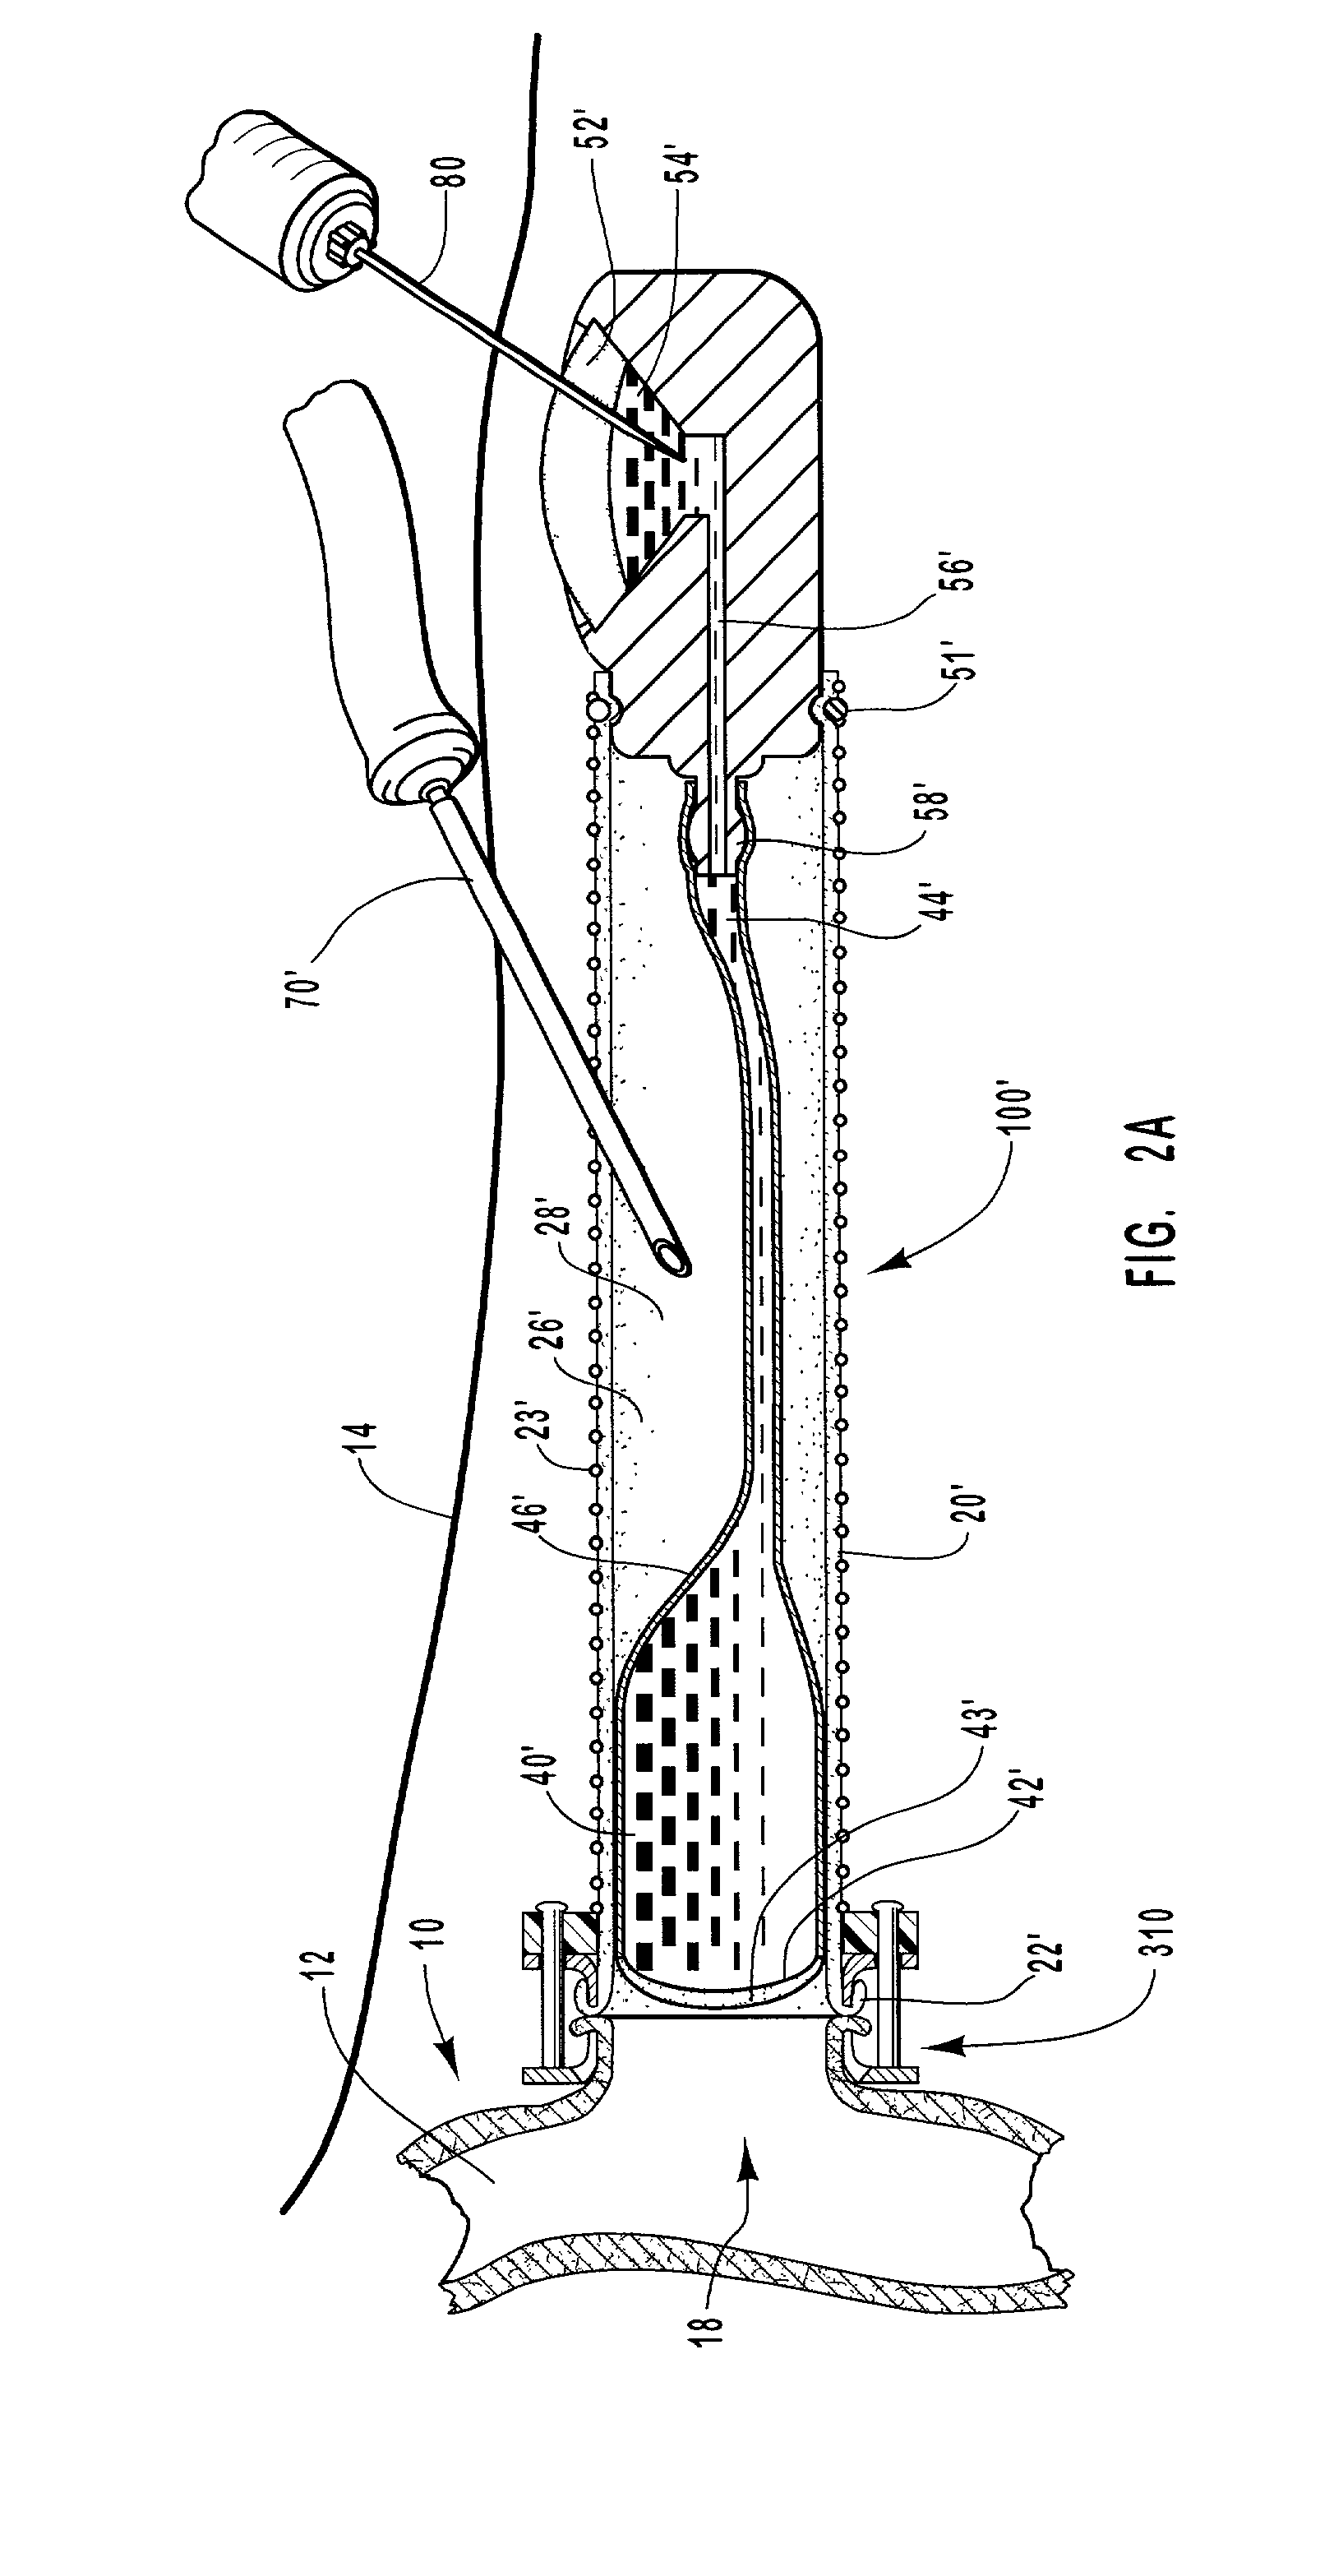 Vascular occlusal balloons and related vascular access devices and systems